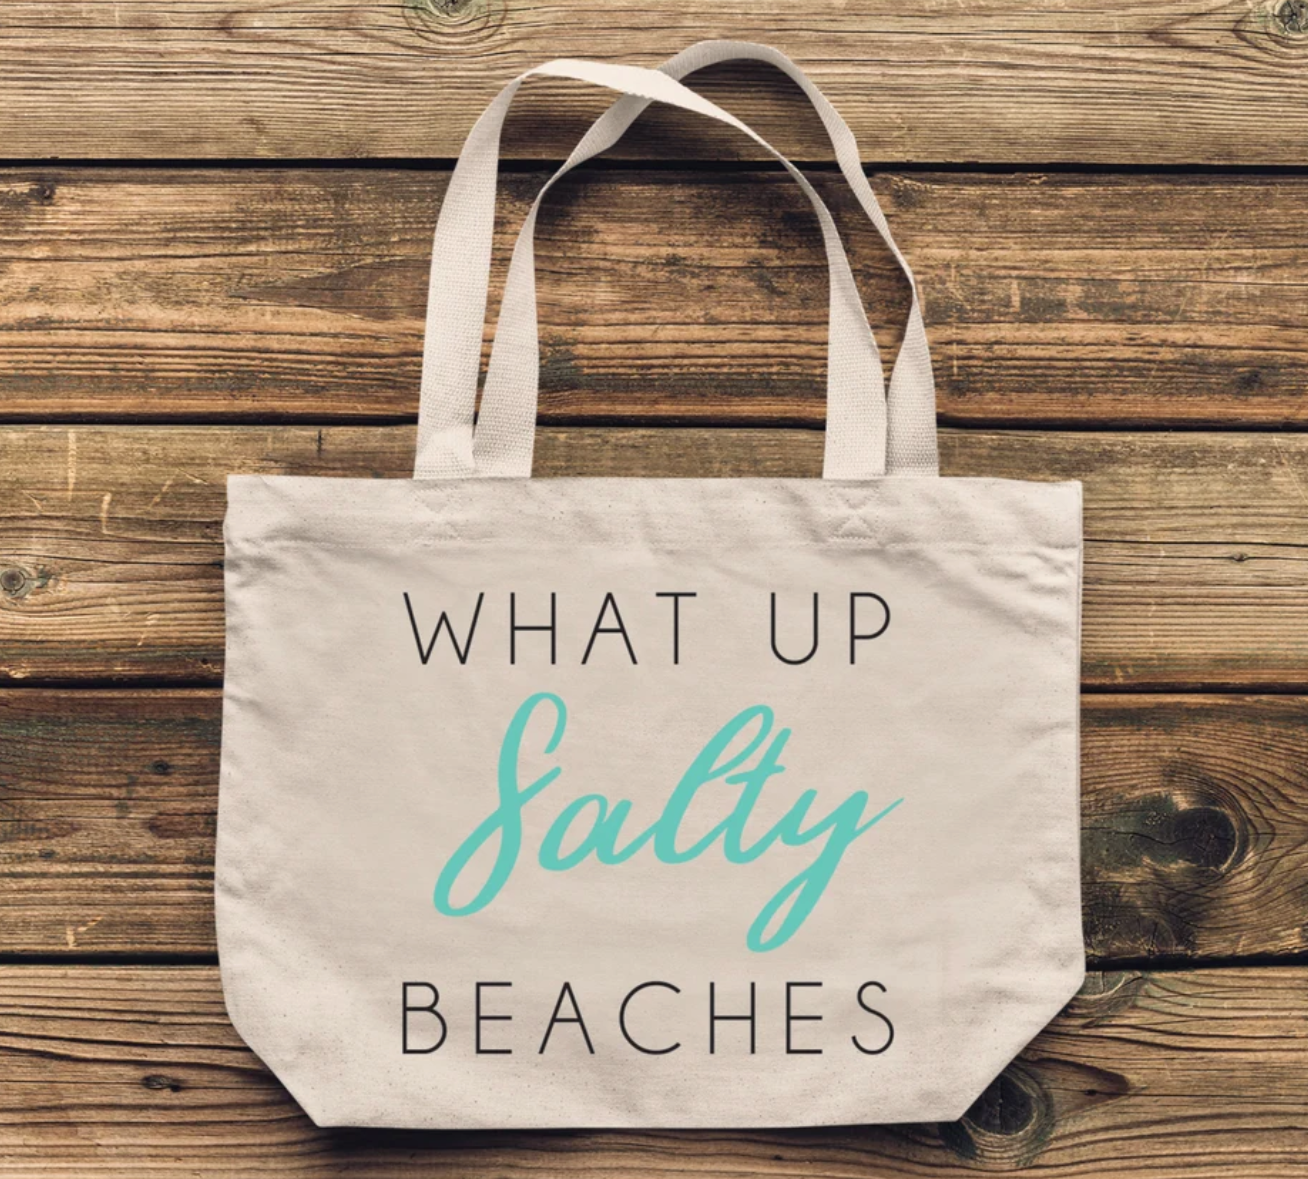 What Up Salty Beaches Oversized Tote Bag | Beach Bag | Tote Bag | Funny Beach Bag | Funny Tote Bag | Various Print Colors